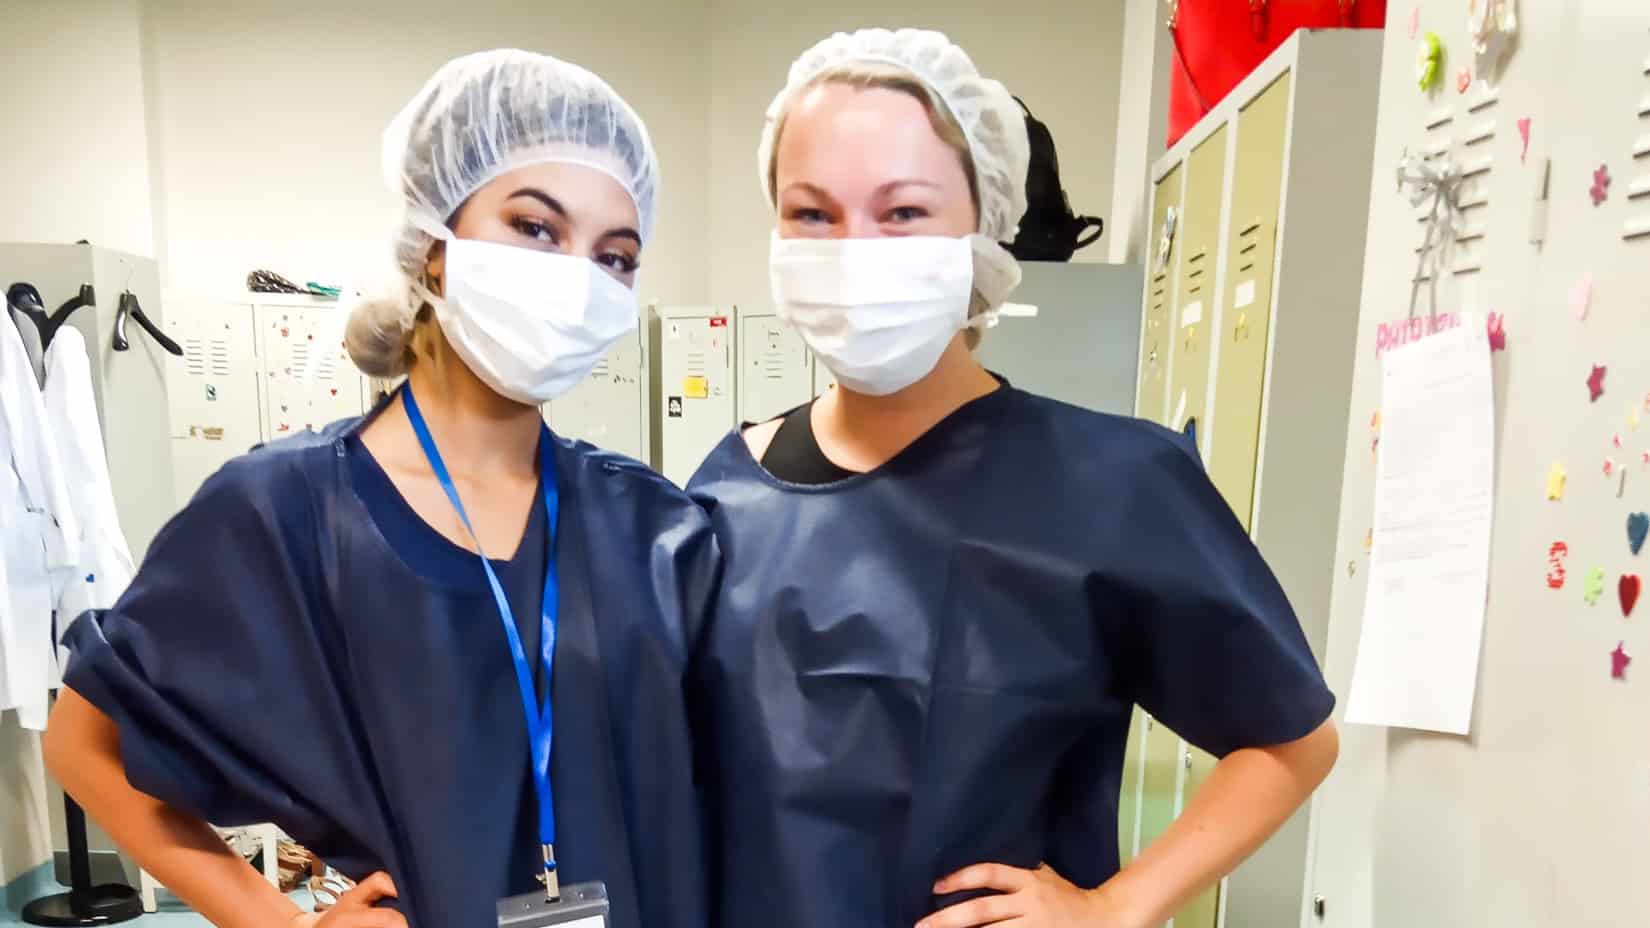 Students wearing masks in the hospital.